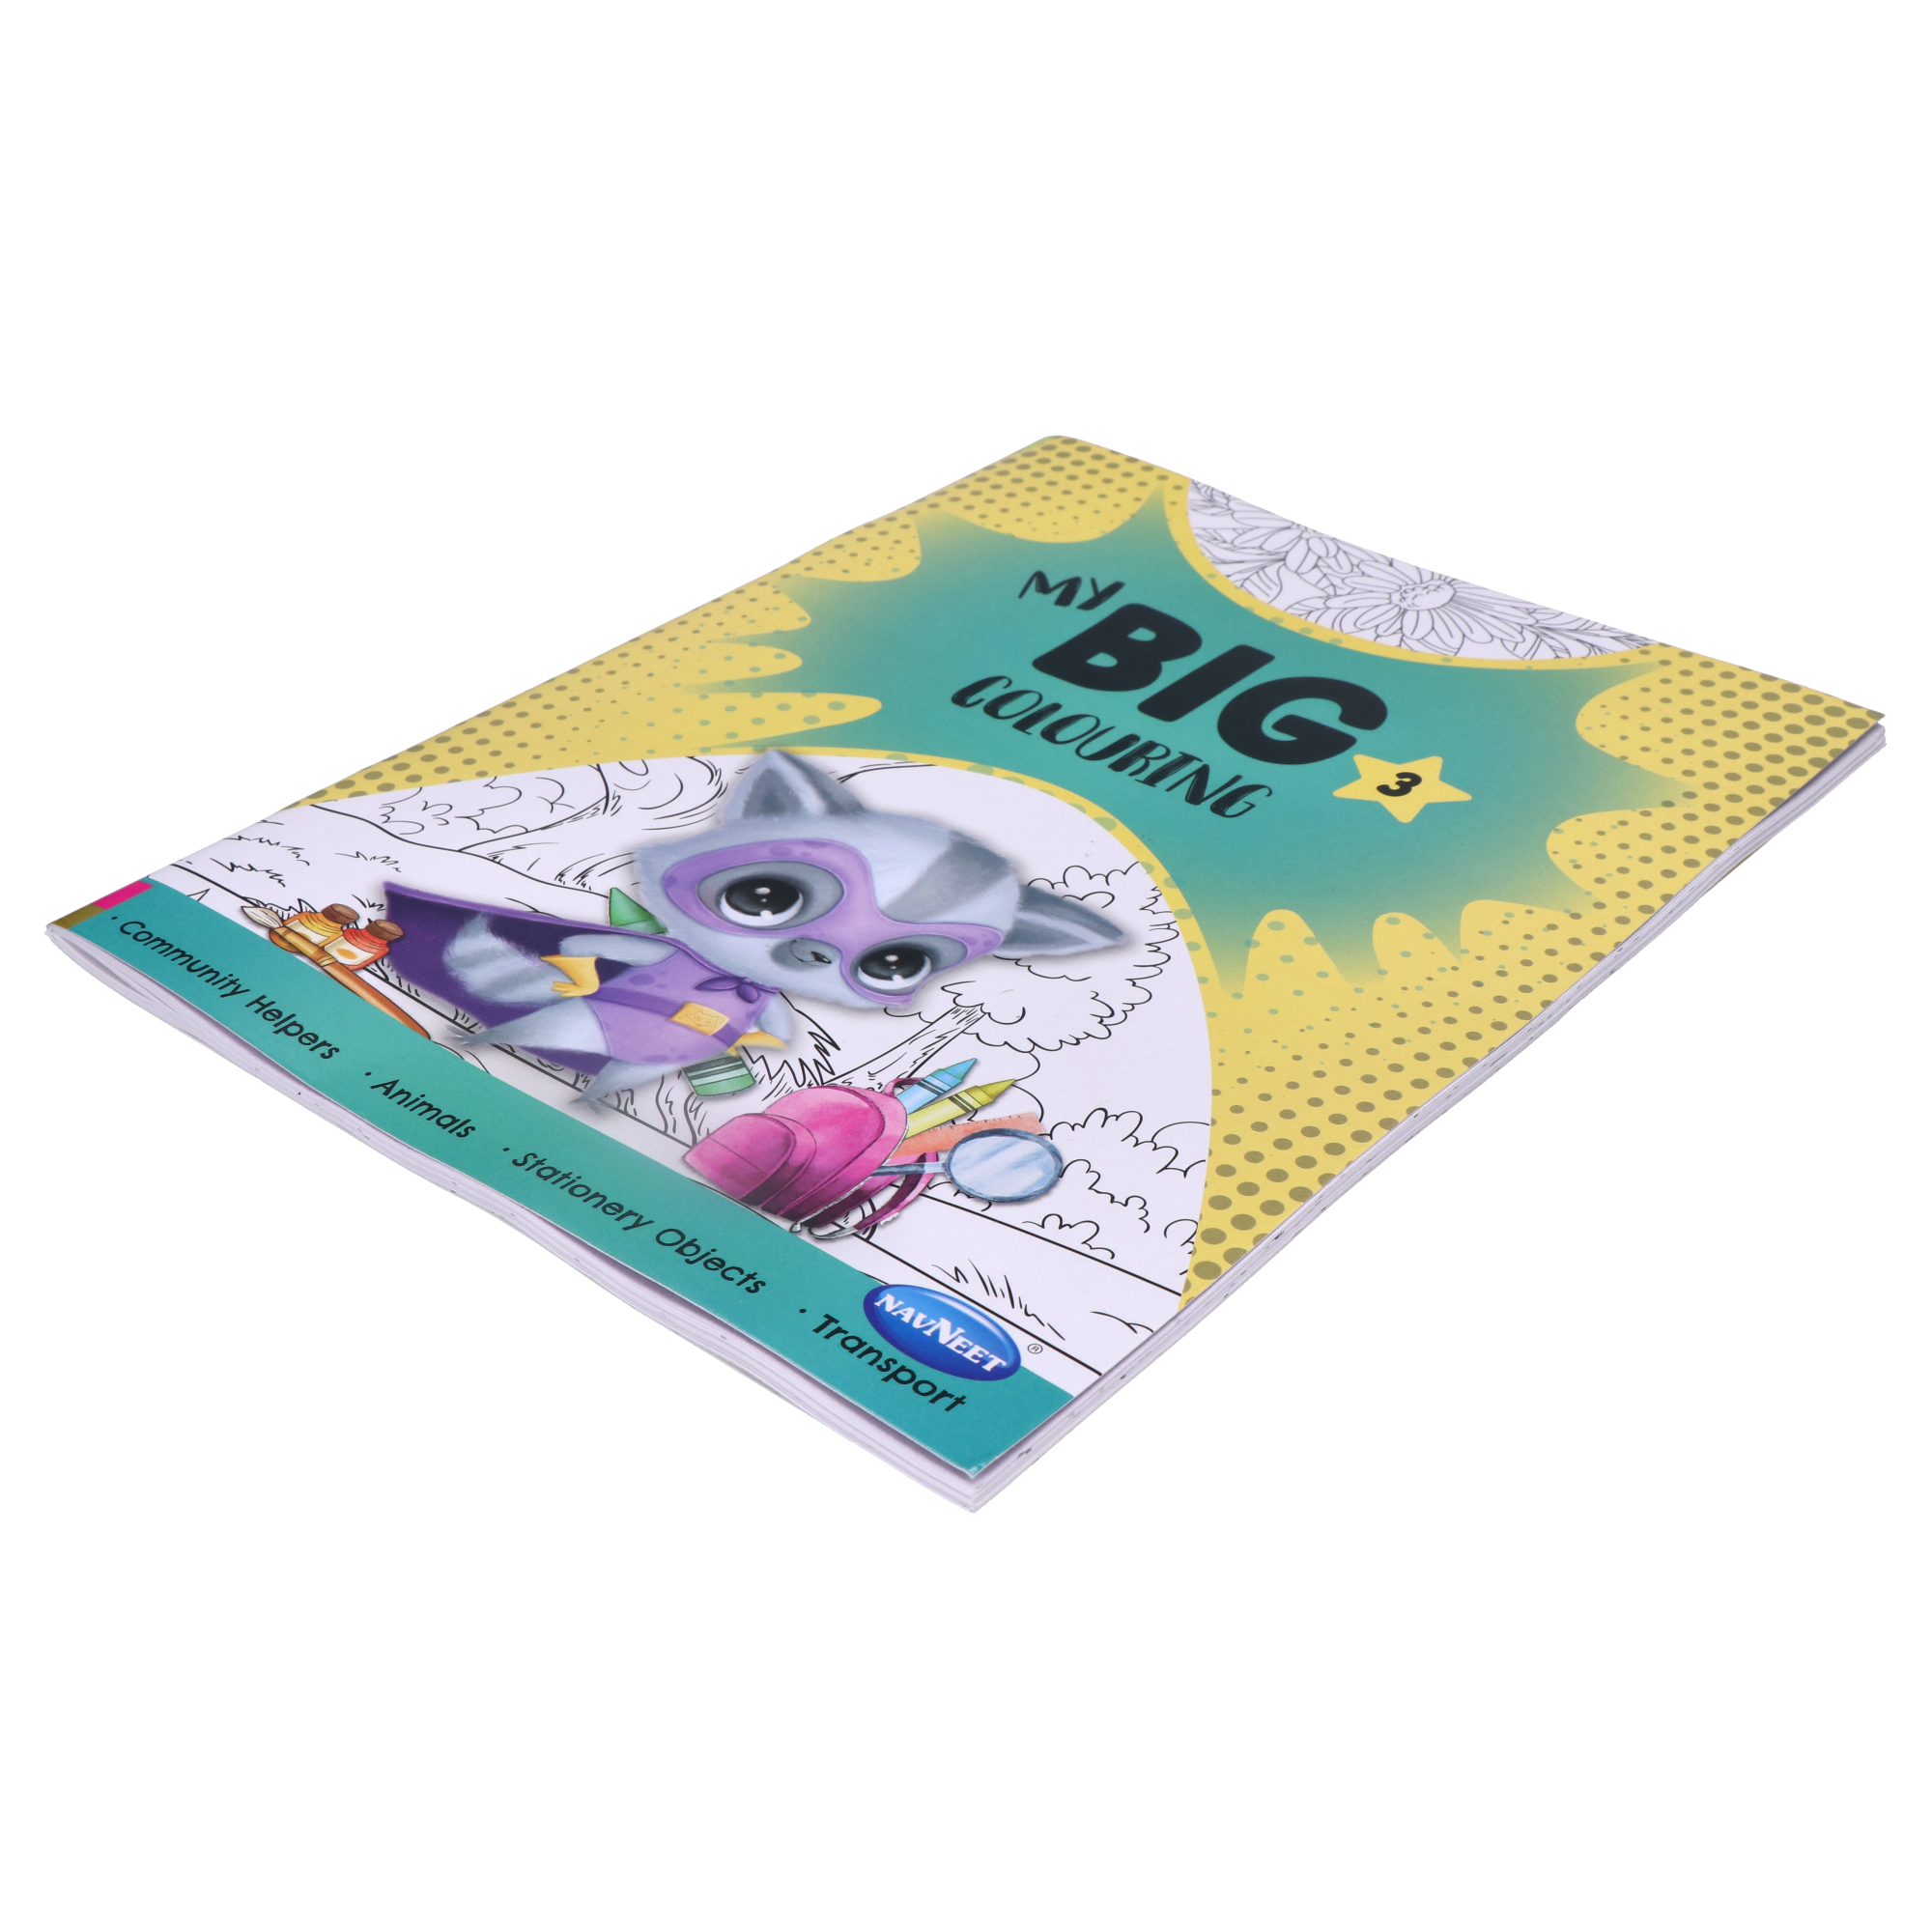 Navneet My Big Colouring Book -III and IV Bold, big and eye-catching illustrations.